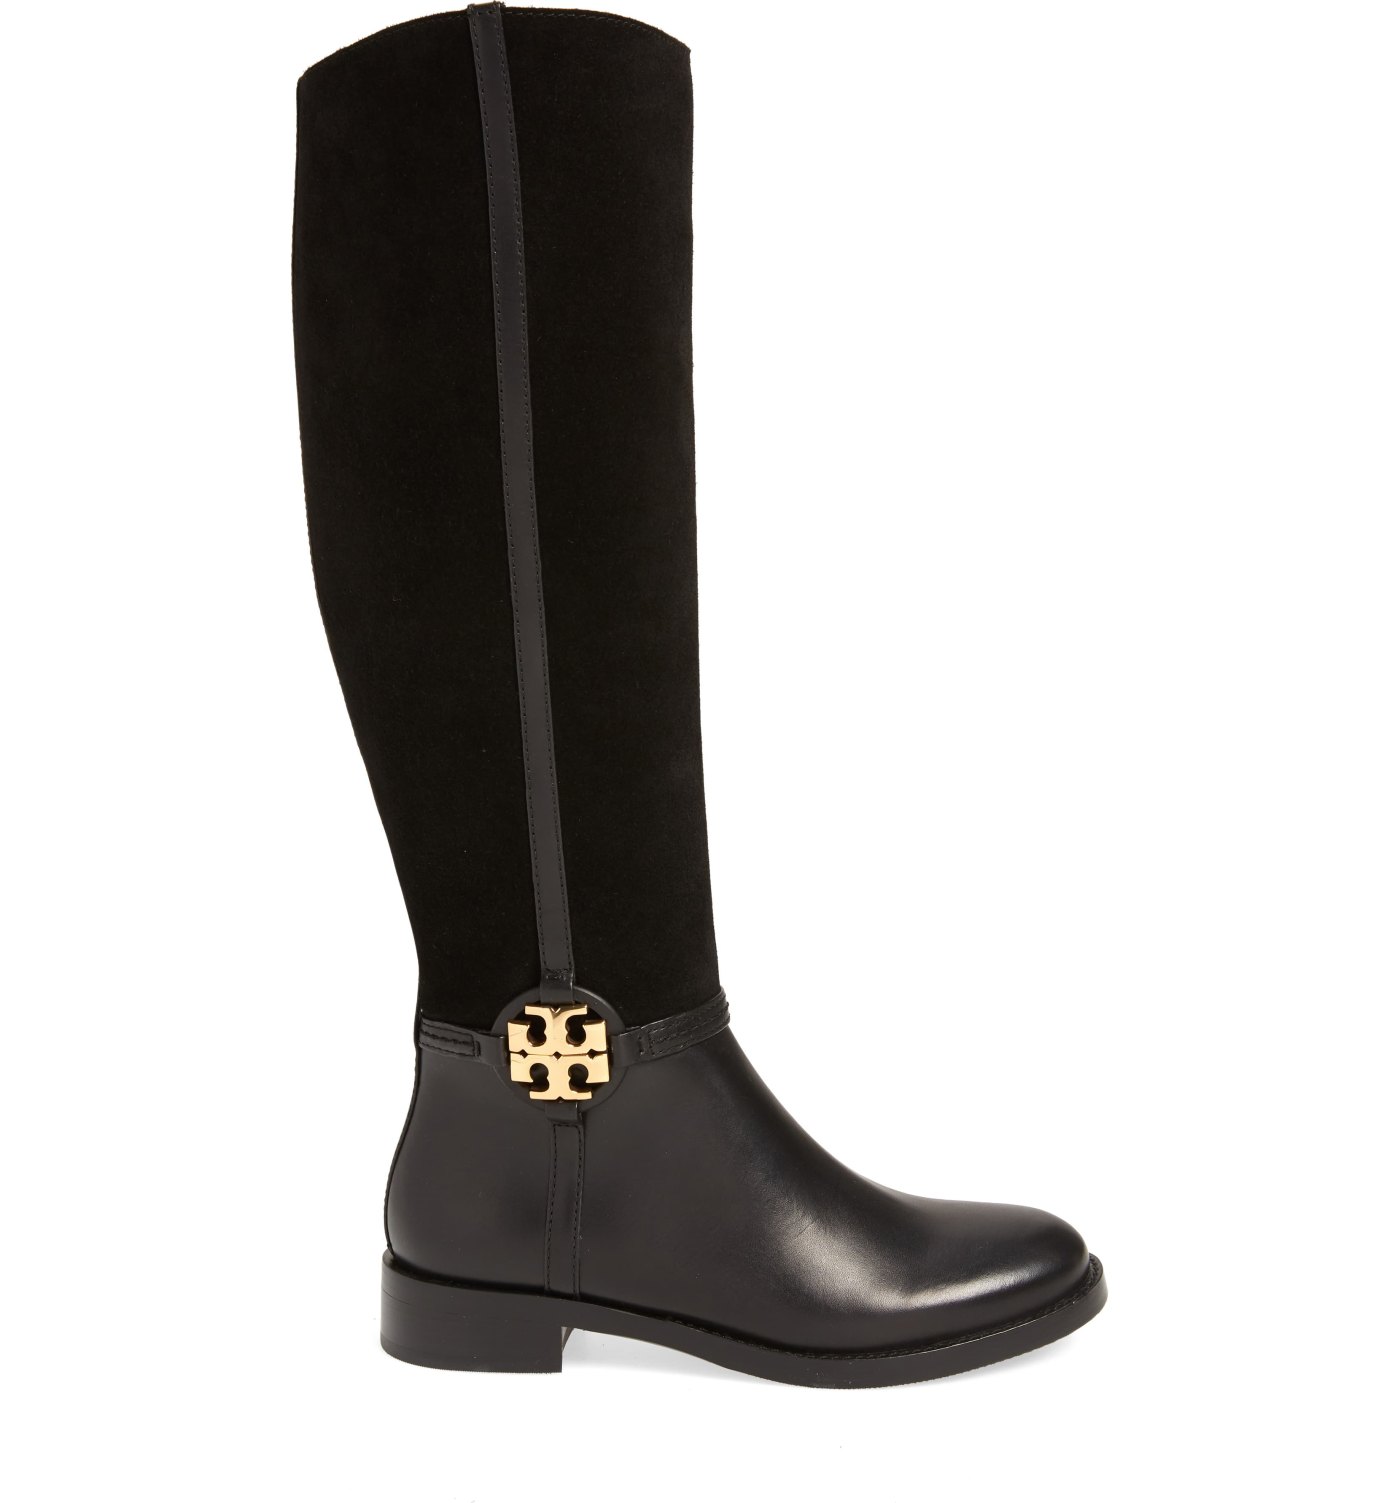 Final Day! These Tory Burch Boots Are 50% Off Through Cyber Monday